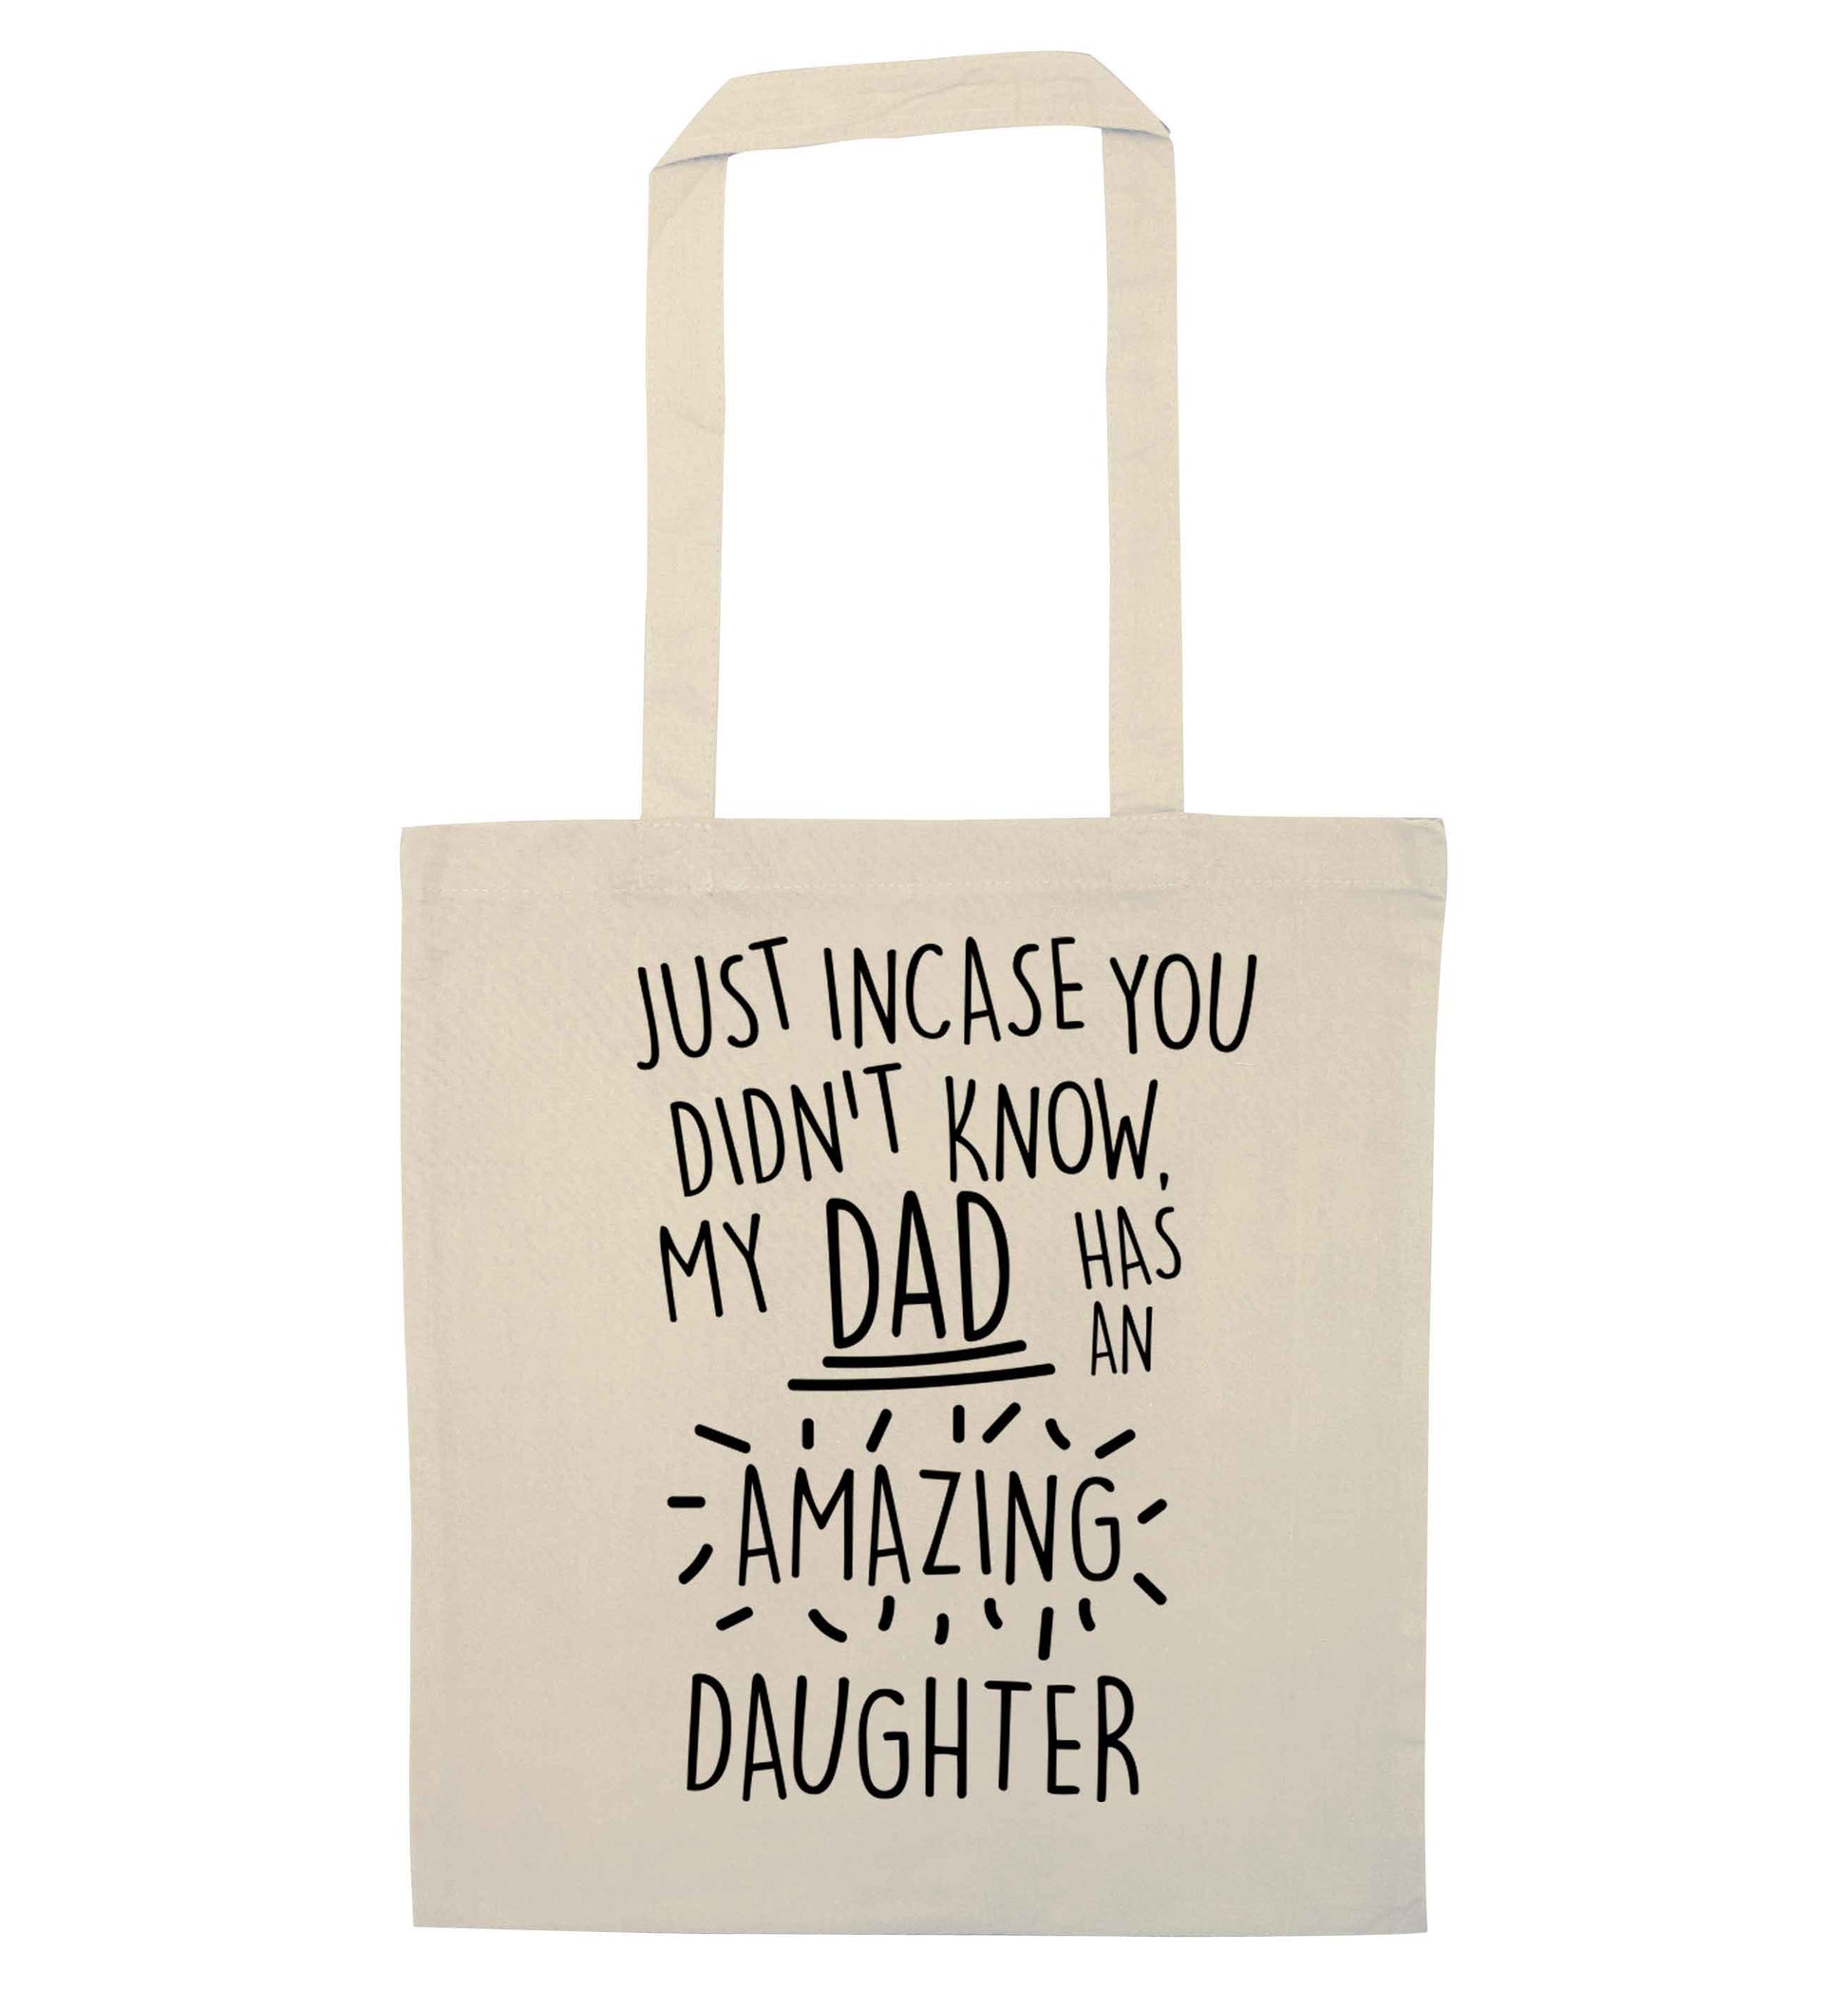 Just incase you didn't know my dad has an amazing daughter natural tote bag